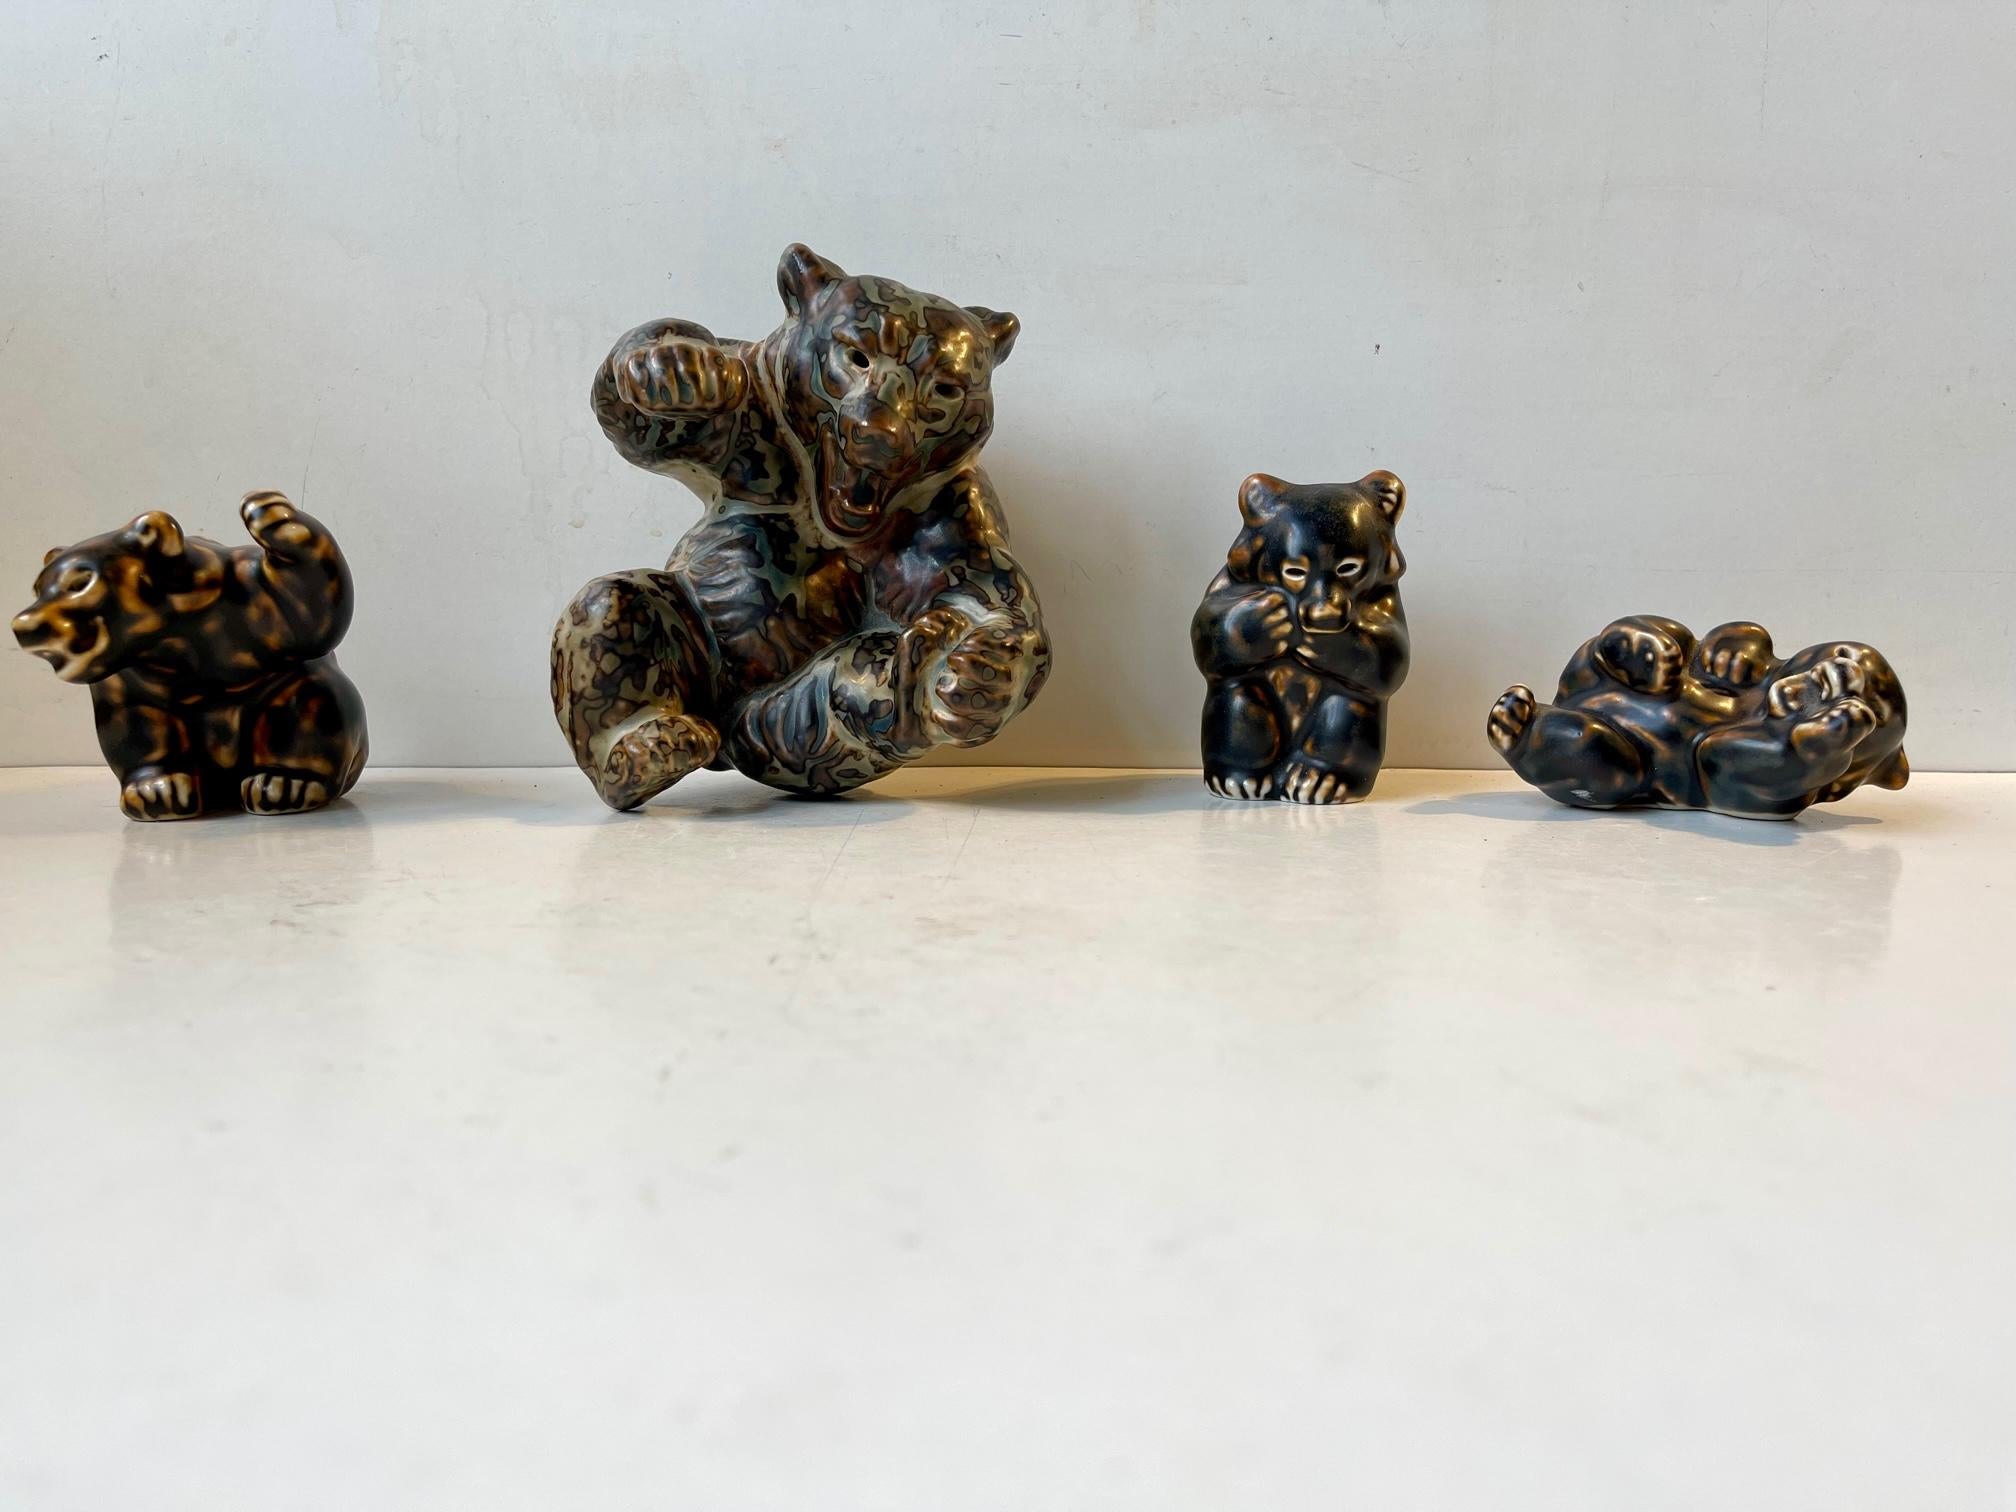 This series of joyful playing bears was designed by the Danish ceramist Knud Kyhn (KK) all the way back in 1929-36. Hugely inspired by the sung glazes applied in Axel Salto's and Bode Willumsen's designs these naturalistic figurines were very